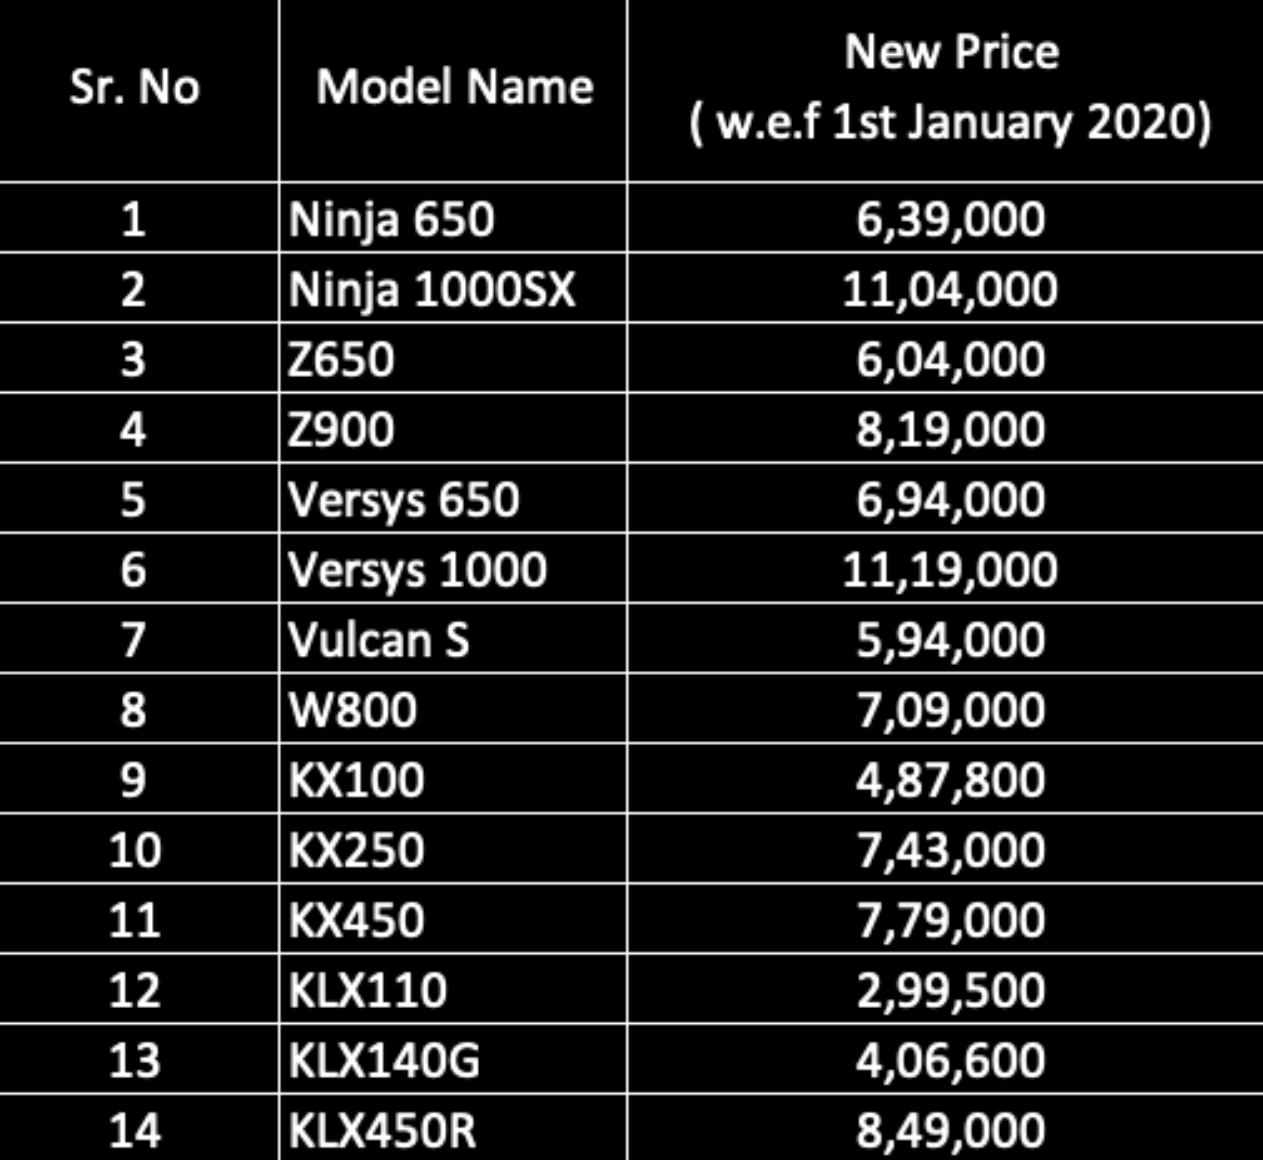 Kawasaki India Releases New Price List To Come Into Effect From 1 Jan 21